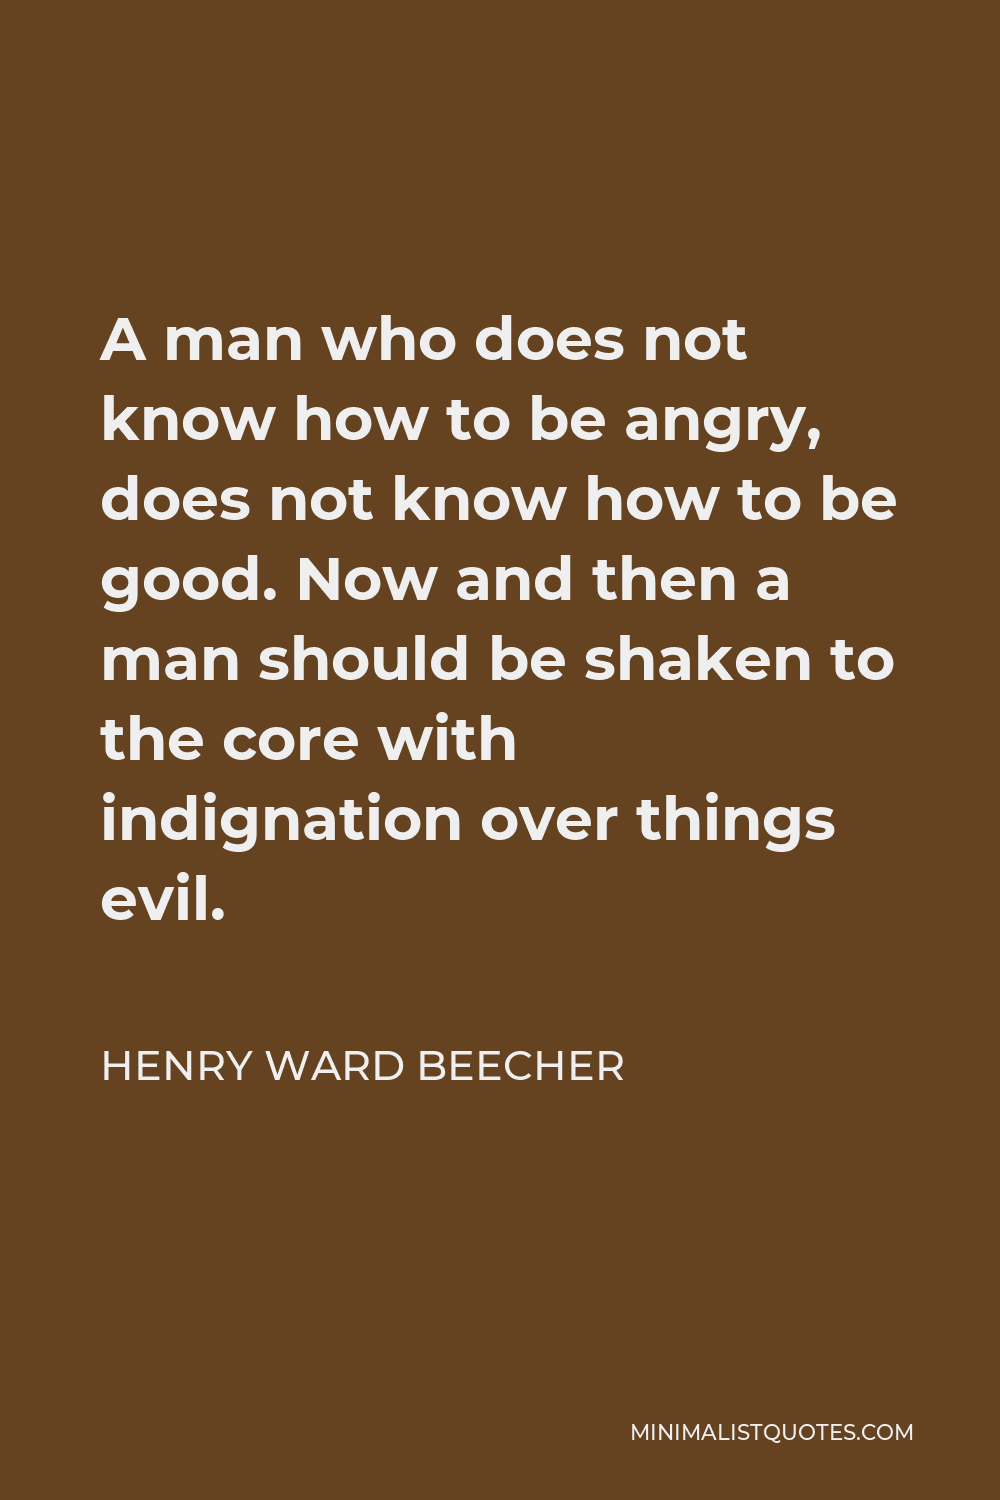 Henry Ward Beecher Quote - A man who does not know how to be angry, does not know how to be good. Now and then a man should be shaken to the core with indignation over things evil.